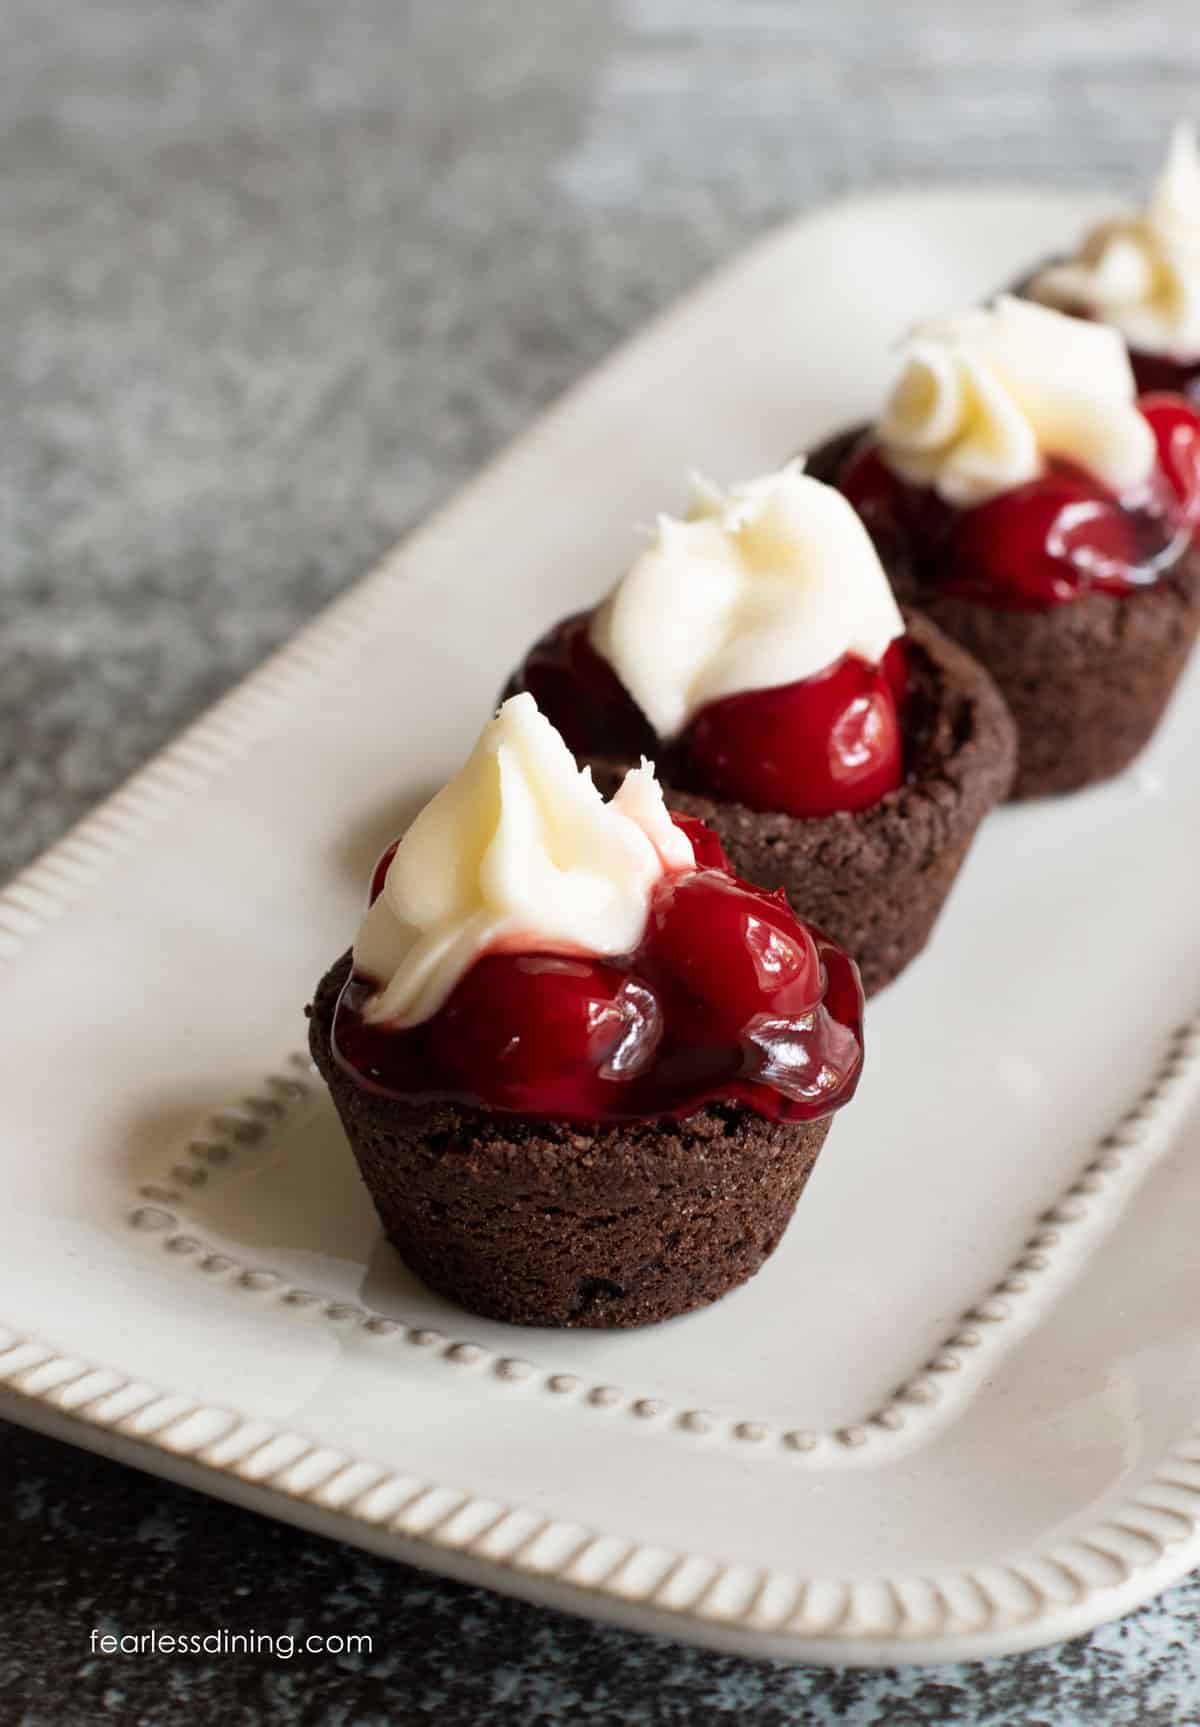 A row of black forest cookie cups on a rectangular platter.